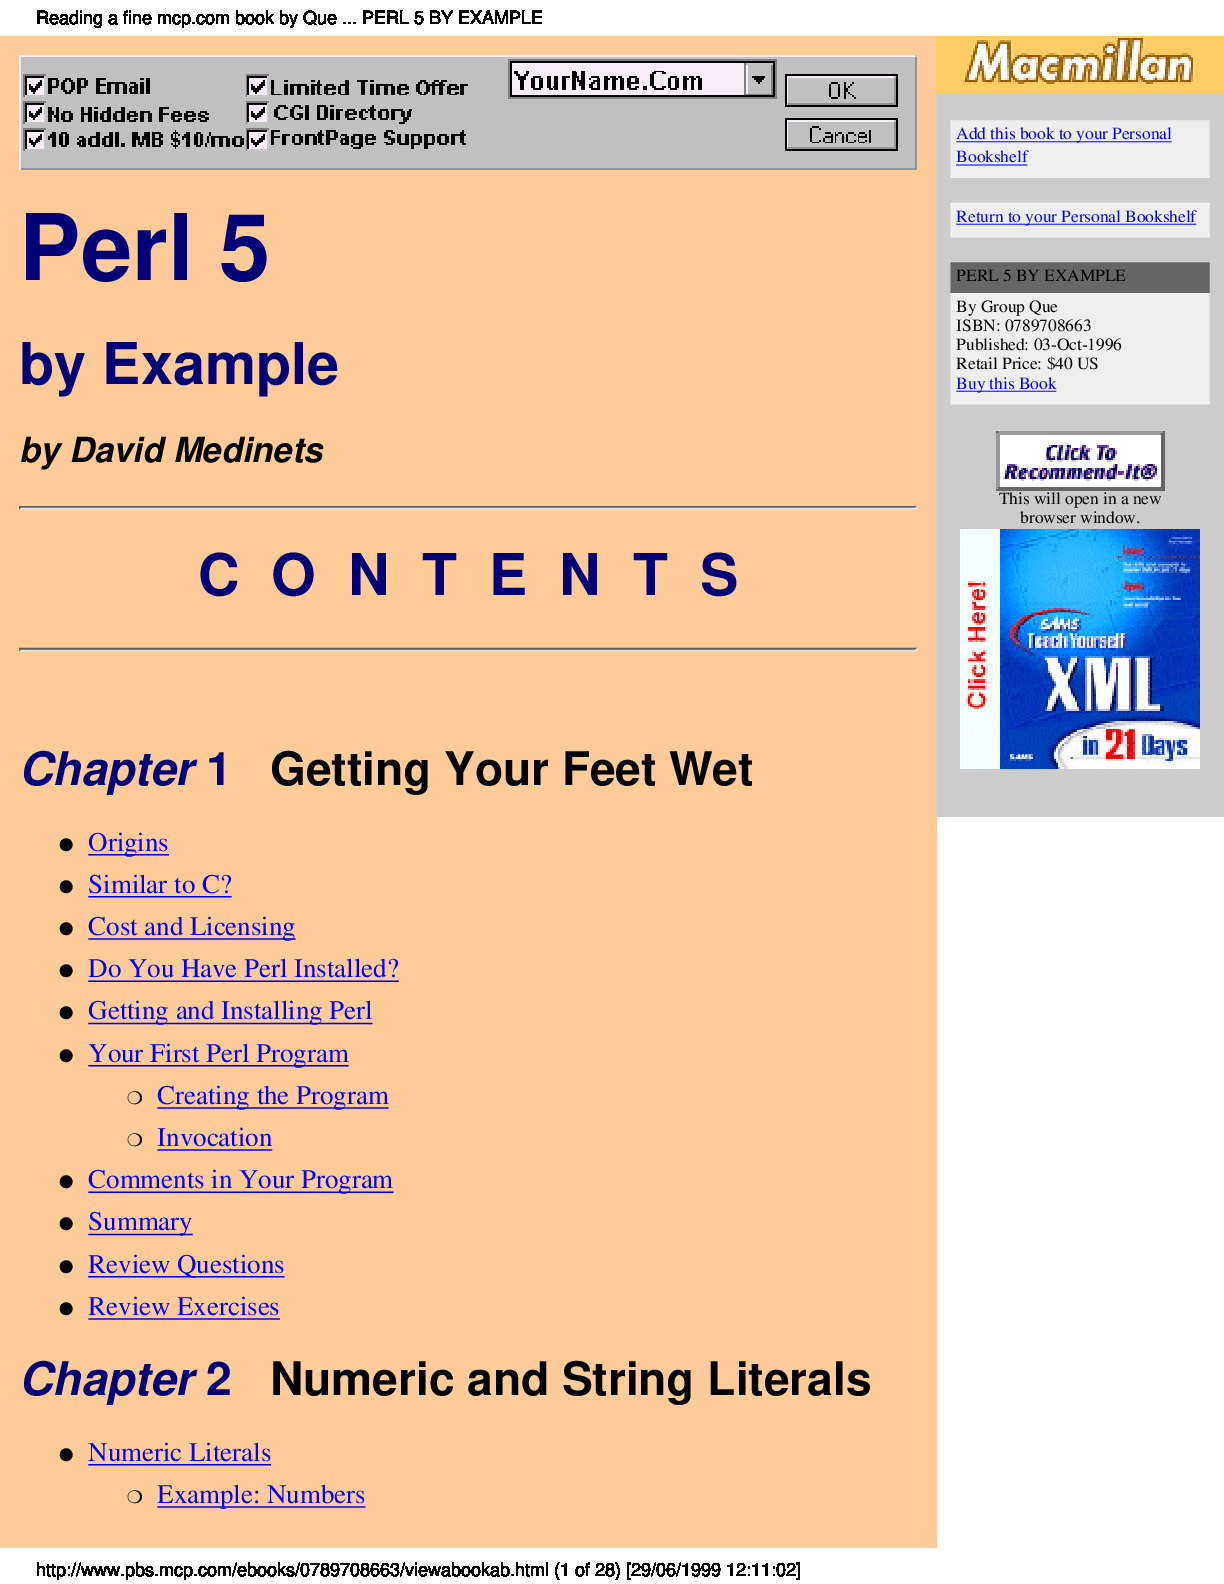 perl_5_by_example